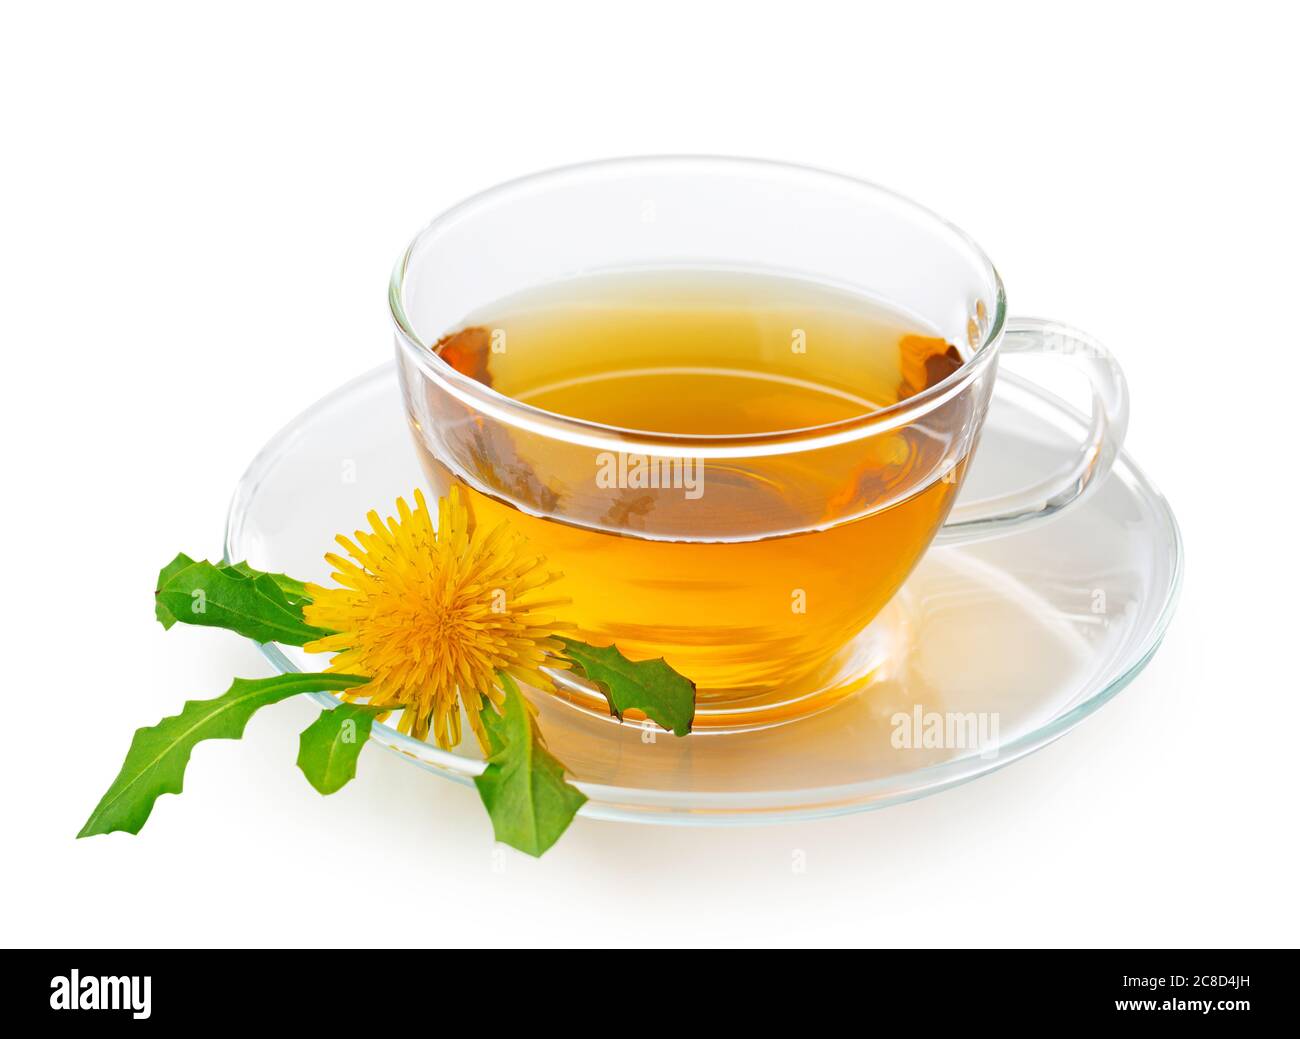 Dandelion tea in a transparent cup with dandelion flower and leaves on white background Stock Photo